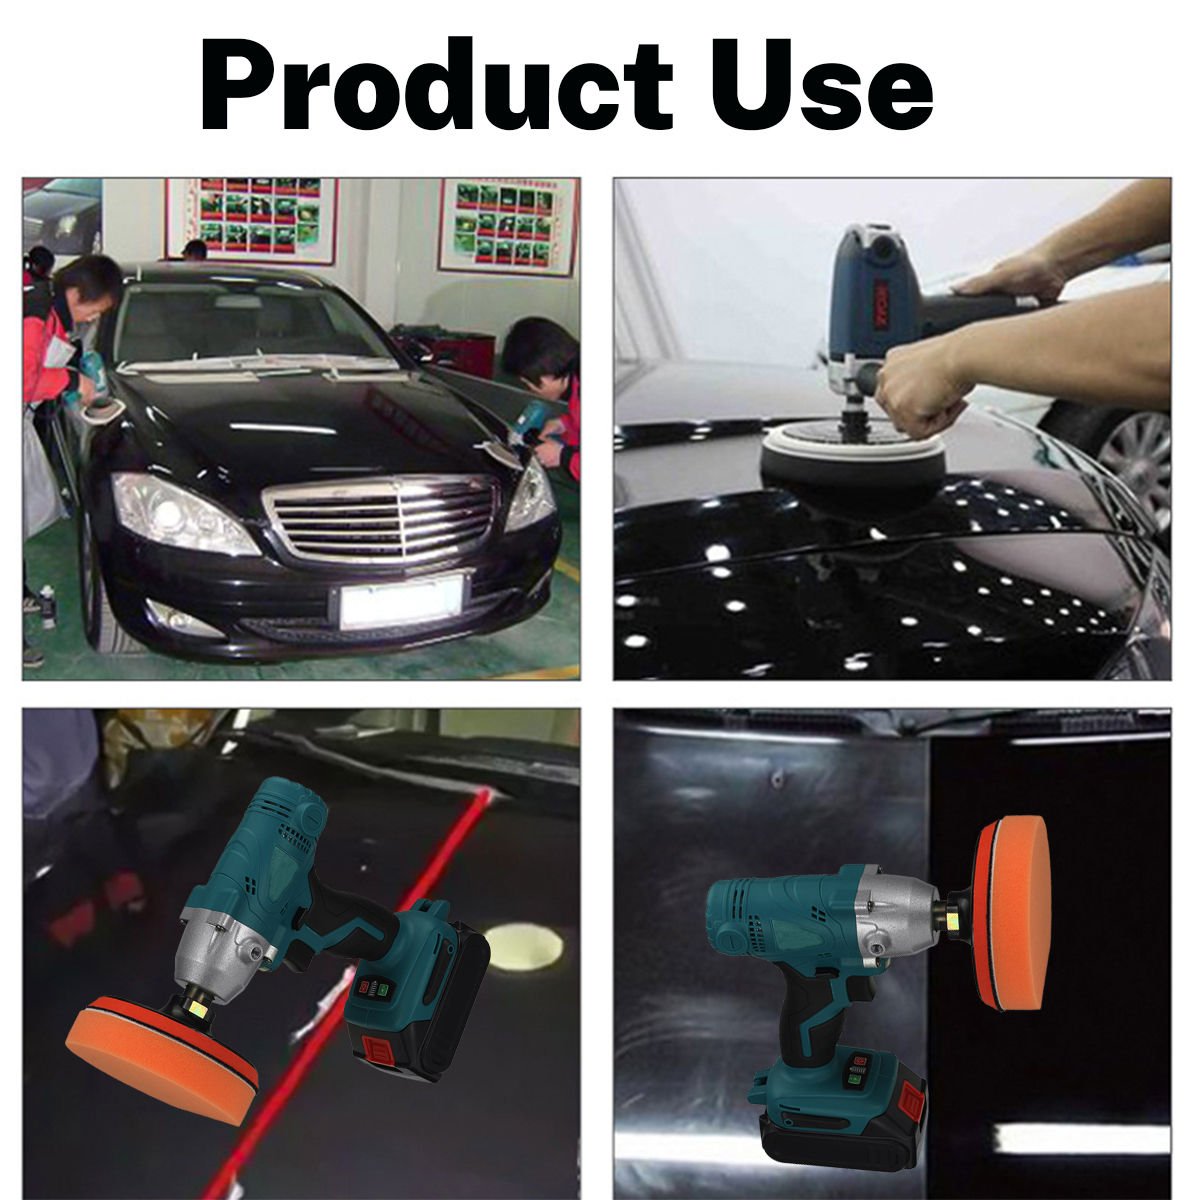 2800rmin-Speed-Regulated-2In1-Cordless-Electric-Drill-Polisher-15Ah-Battery-Car-Repair-Polisher-Dril-1889958-6